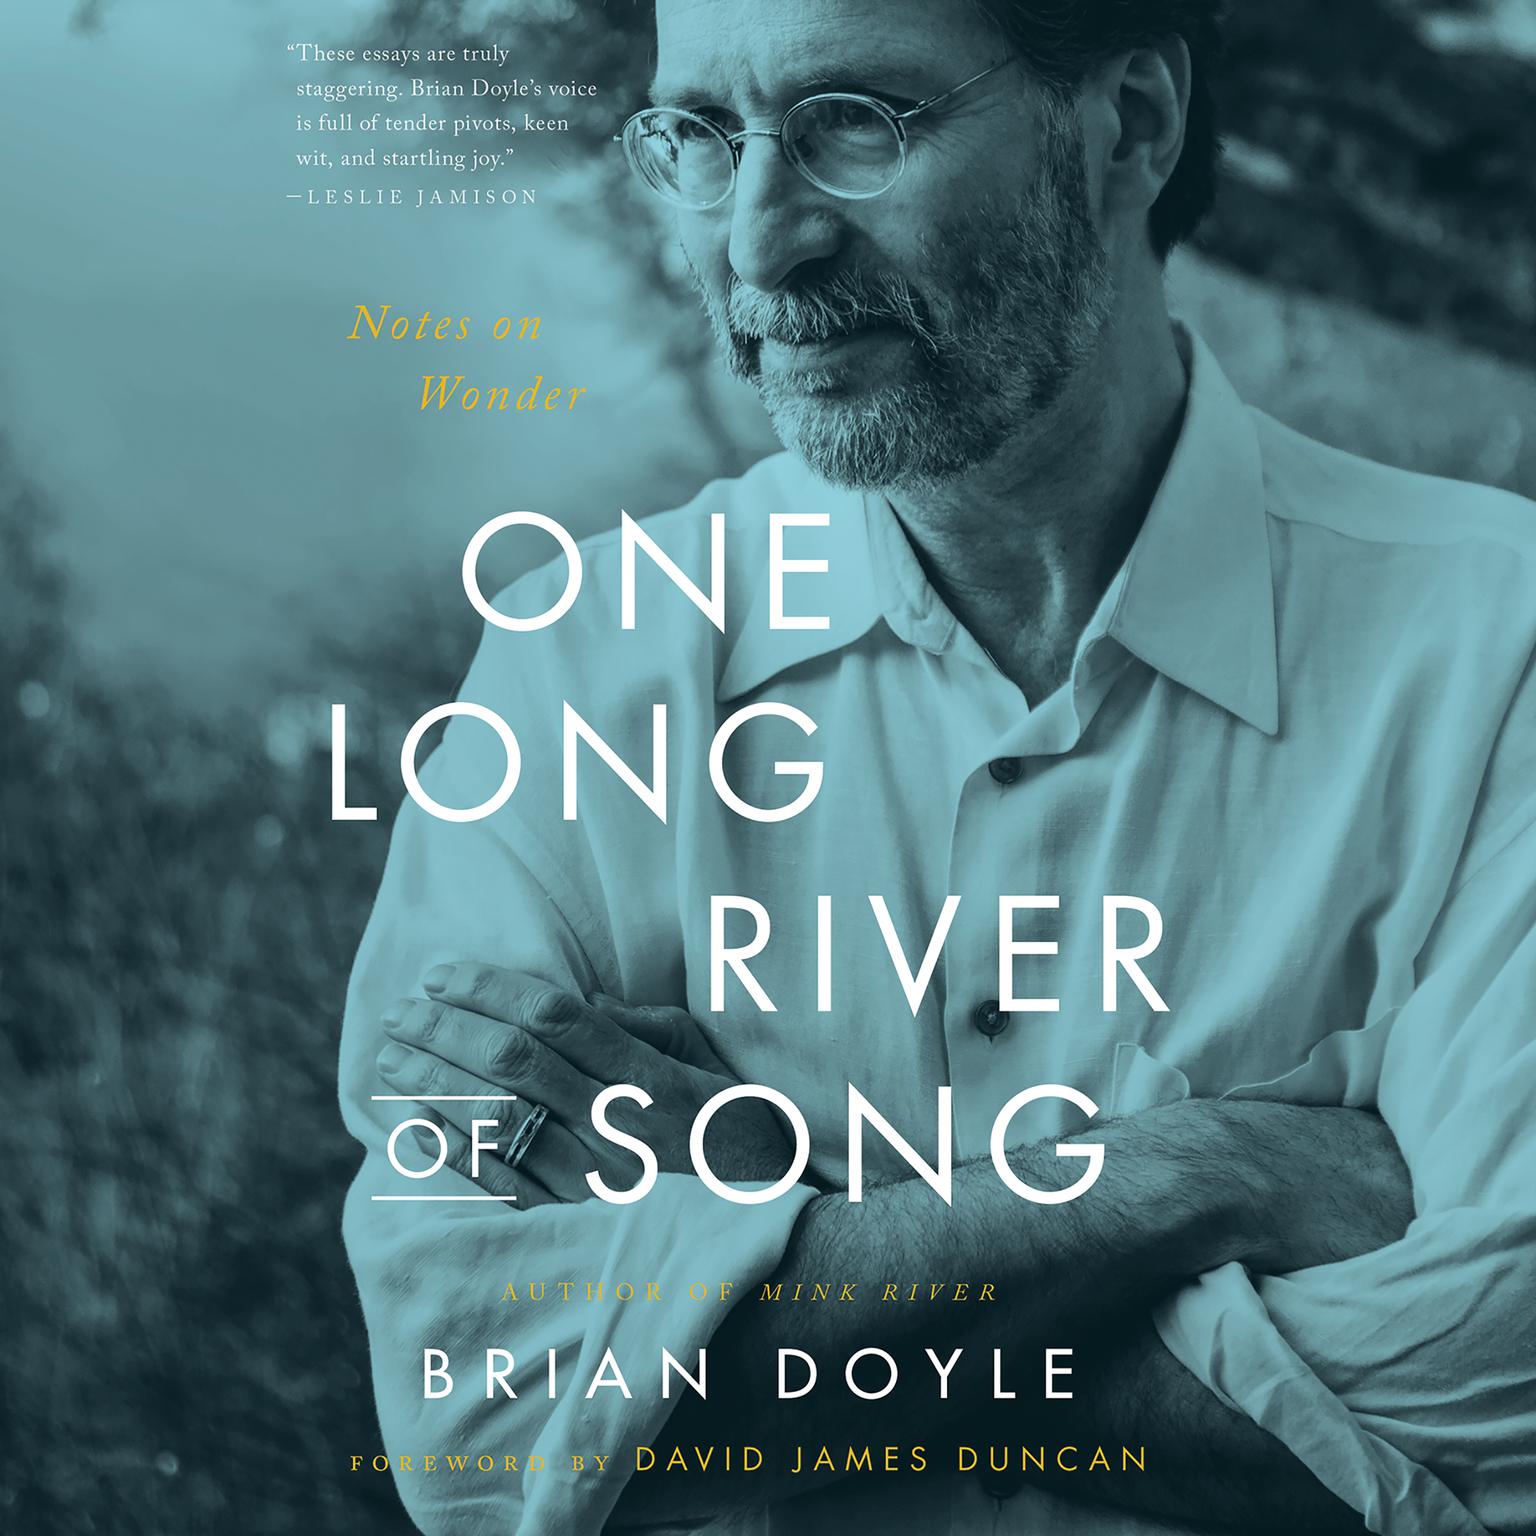 One Long River of Song: Notes on Wonder Audiobook, by Brian Doyle